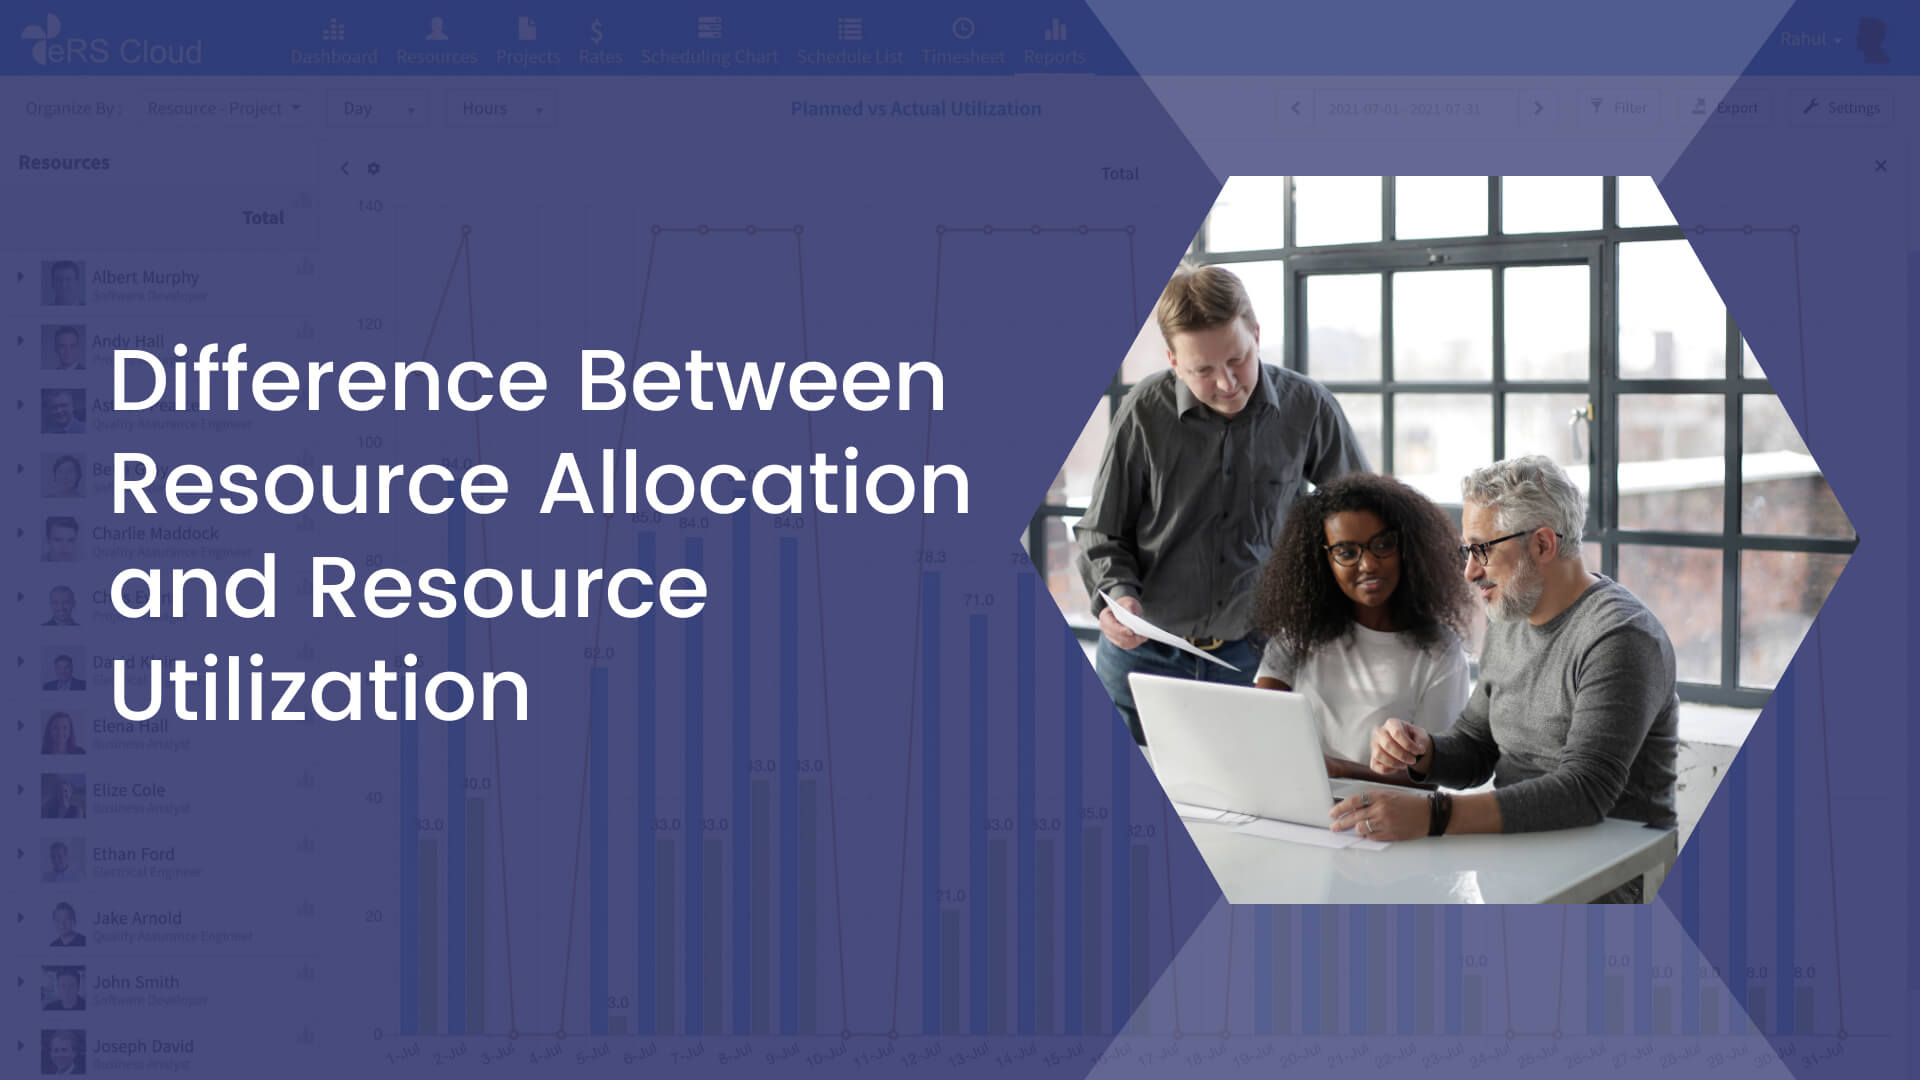 Difference between Resource Allocation and Resource Utilization